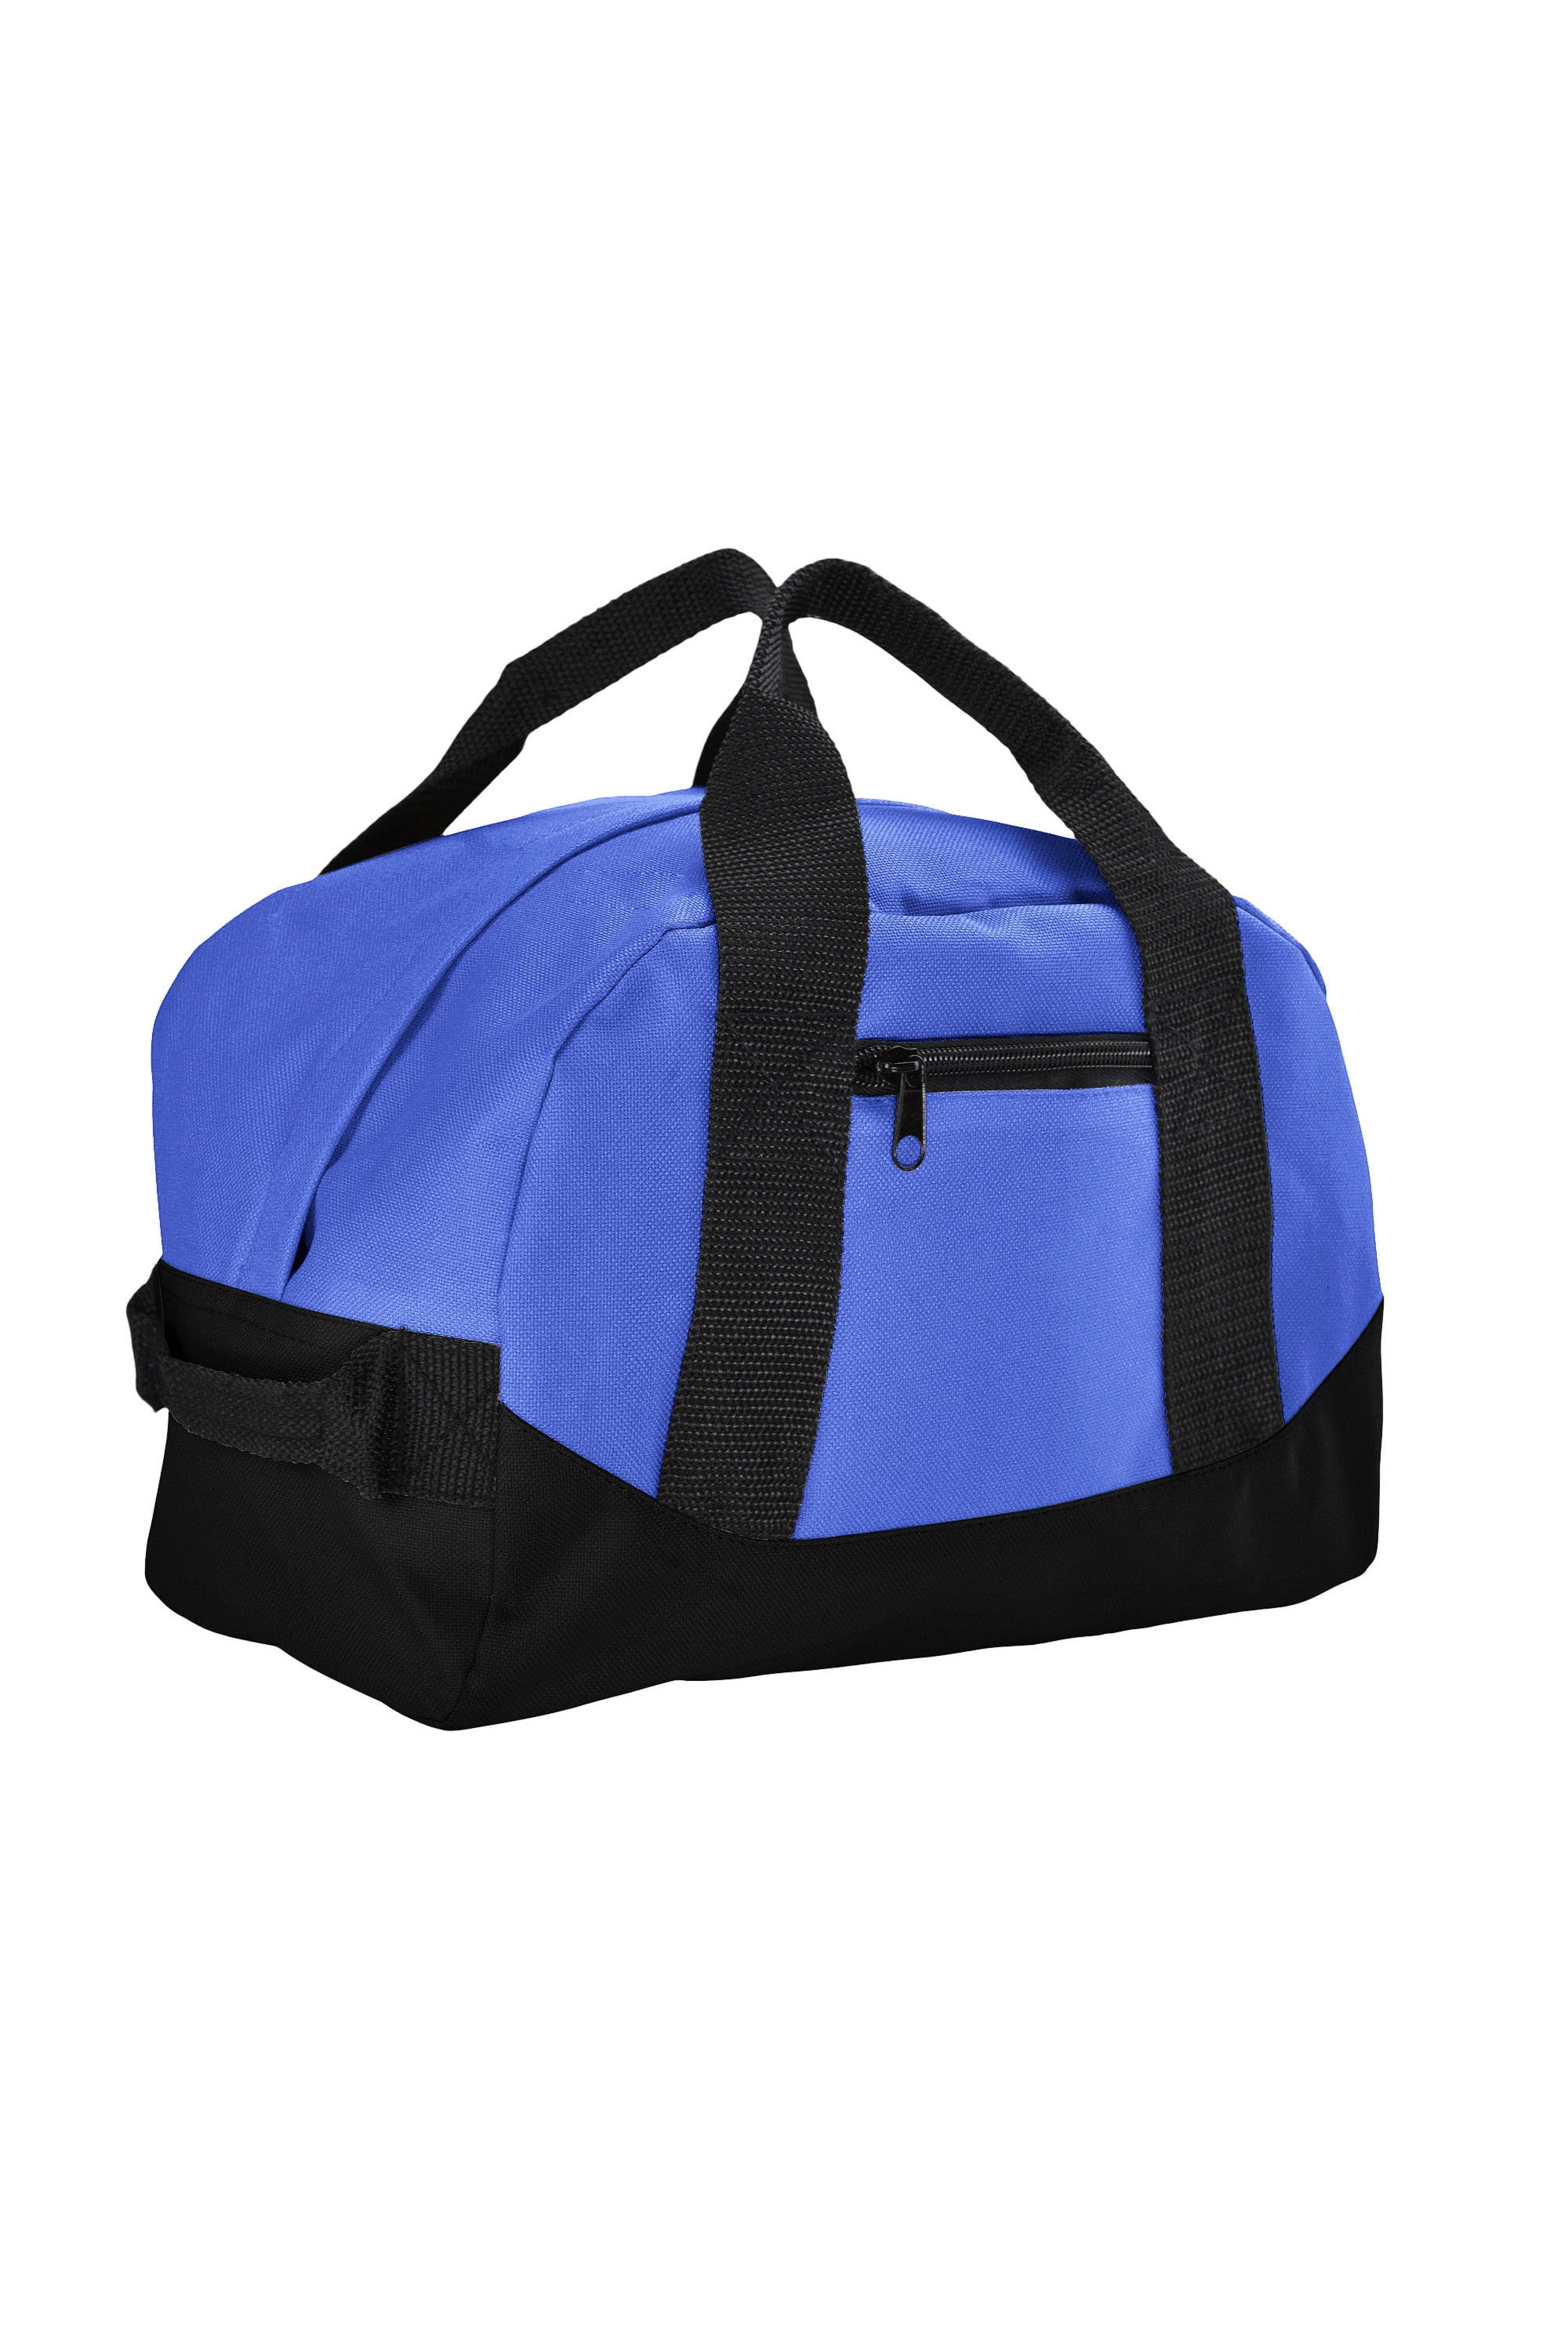 42-inch Lightweight Foldable Polyester Royal Blue Xtra Large Duffel Bag Solid